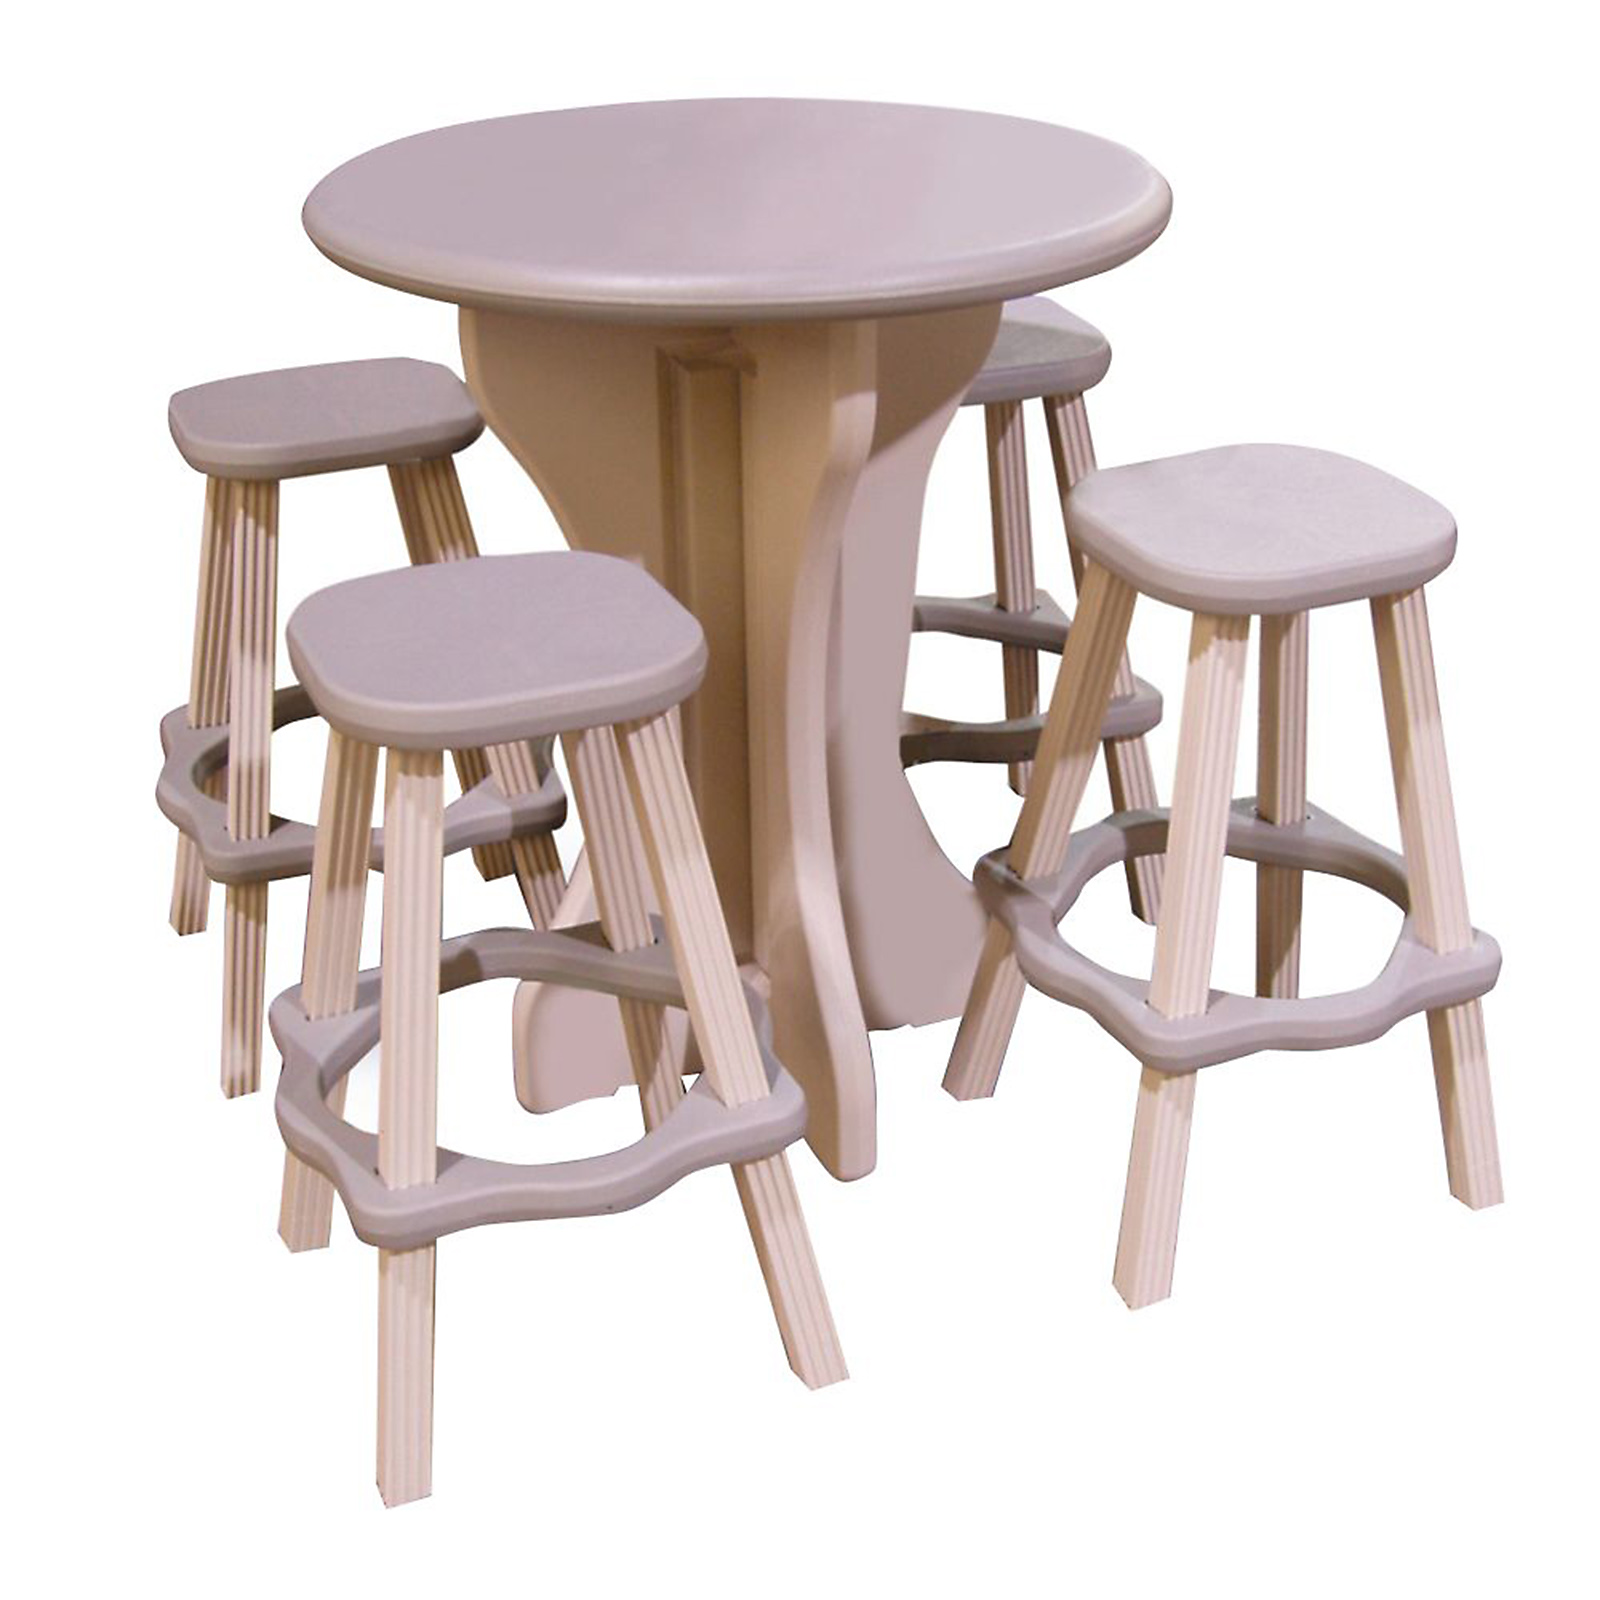 Leisure Accents 5-piece Bistro Table and Bar Stools - Taupe